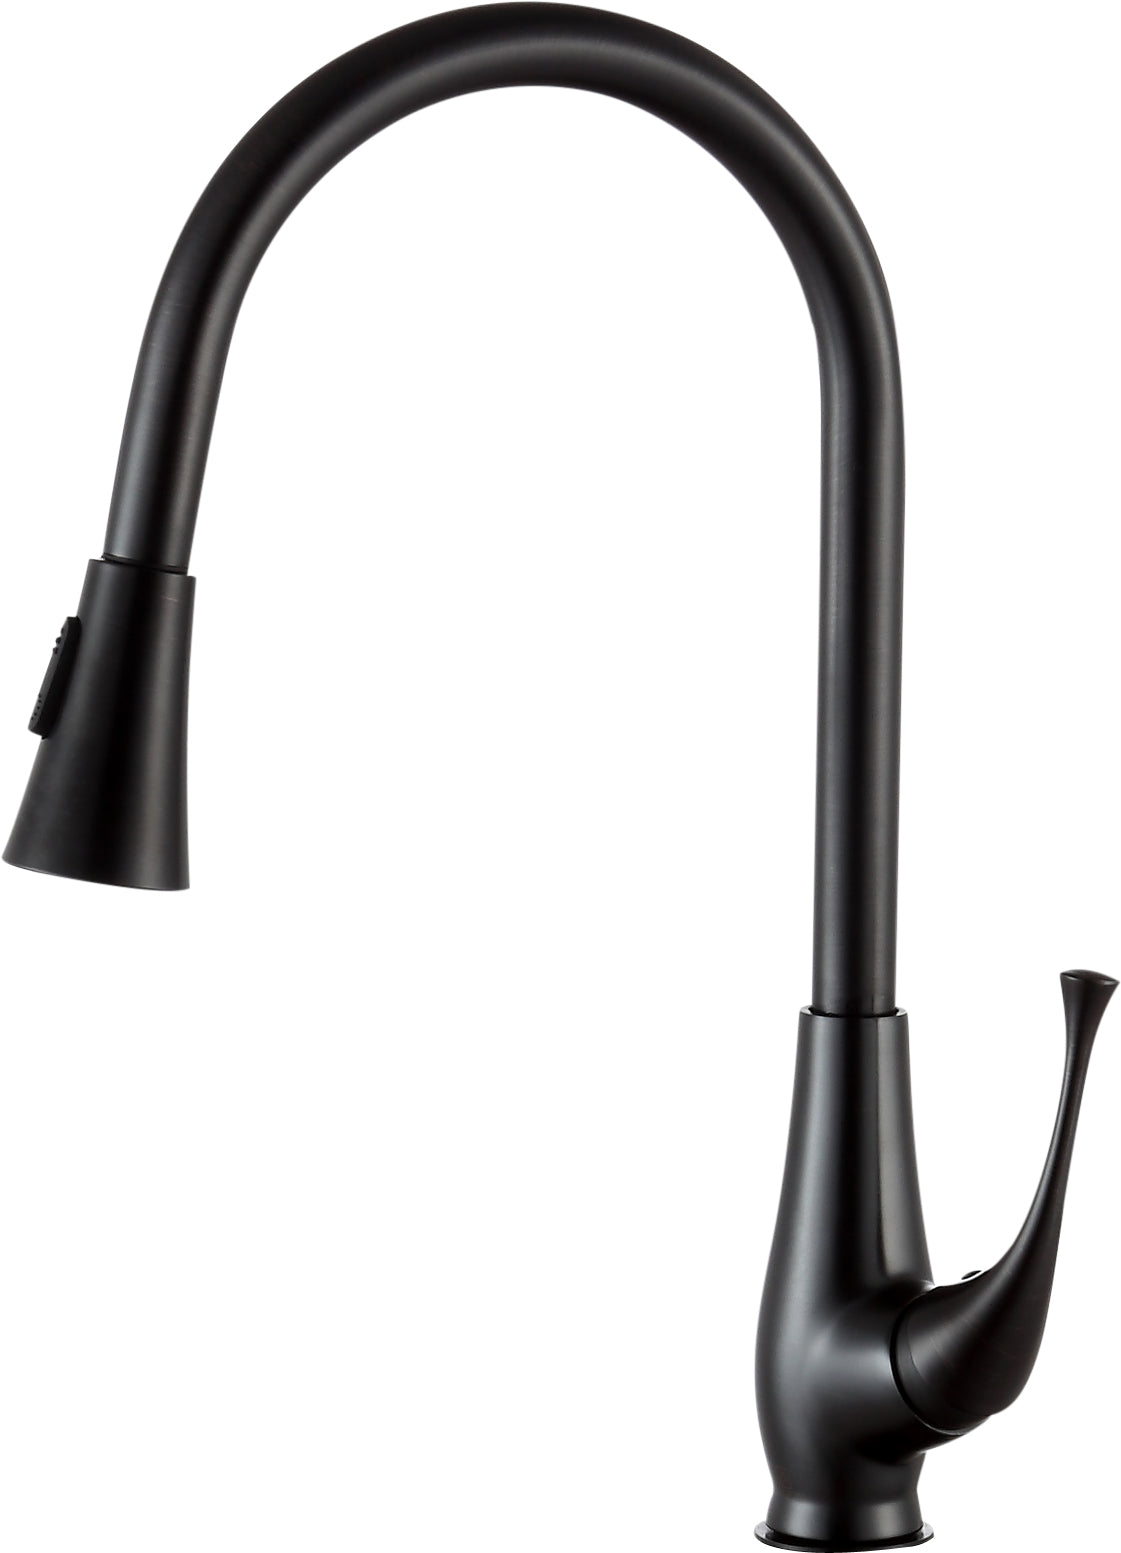 KF-AZ217ORB - Meadow Single-Handle Pull-Out Sprayer Kitchen Faucet in Oil Rubbed Bronze